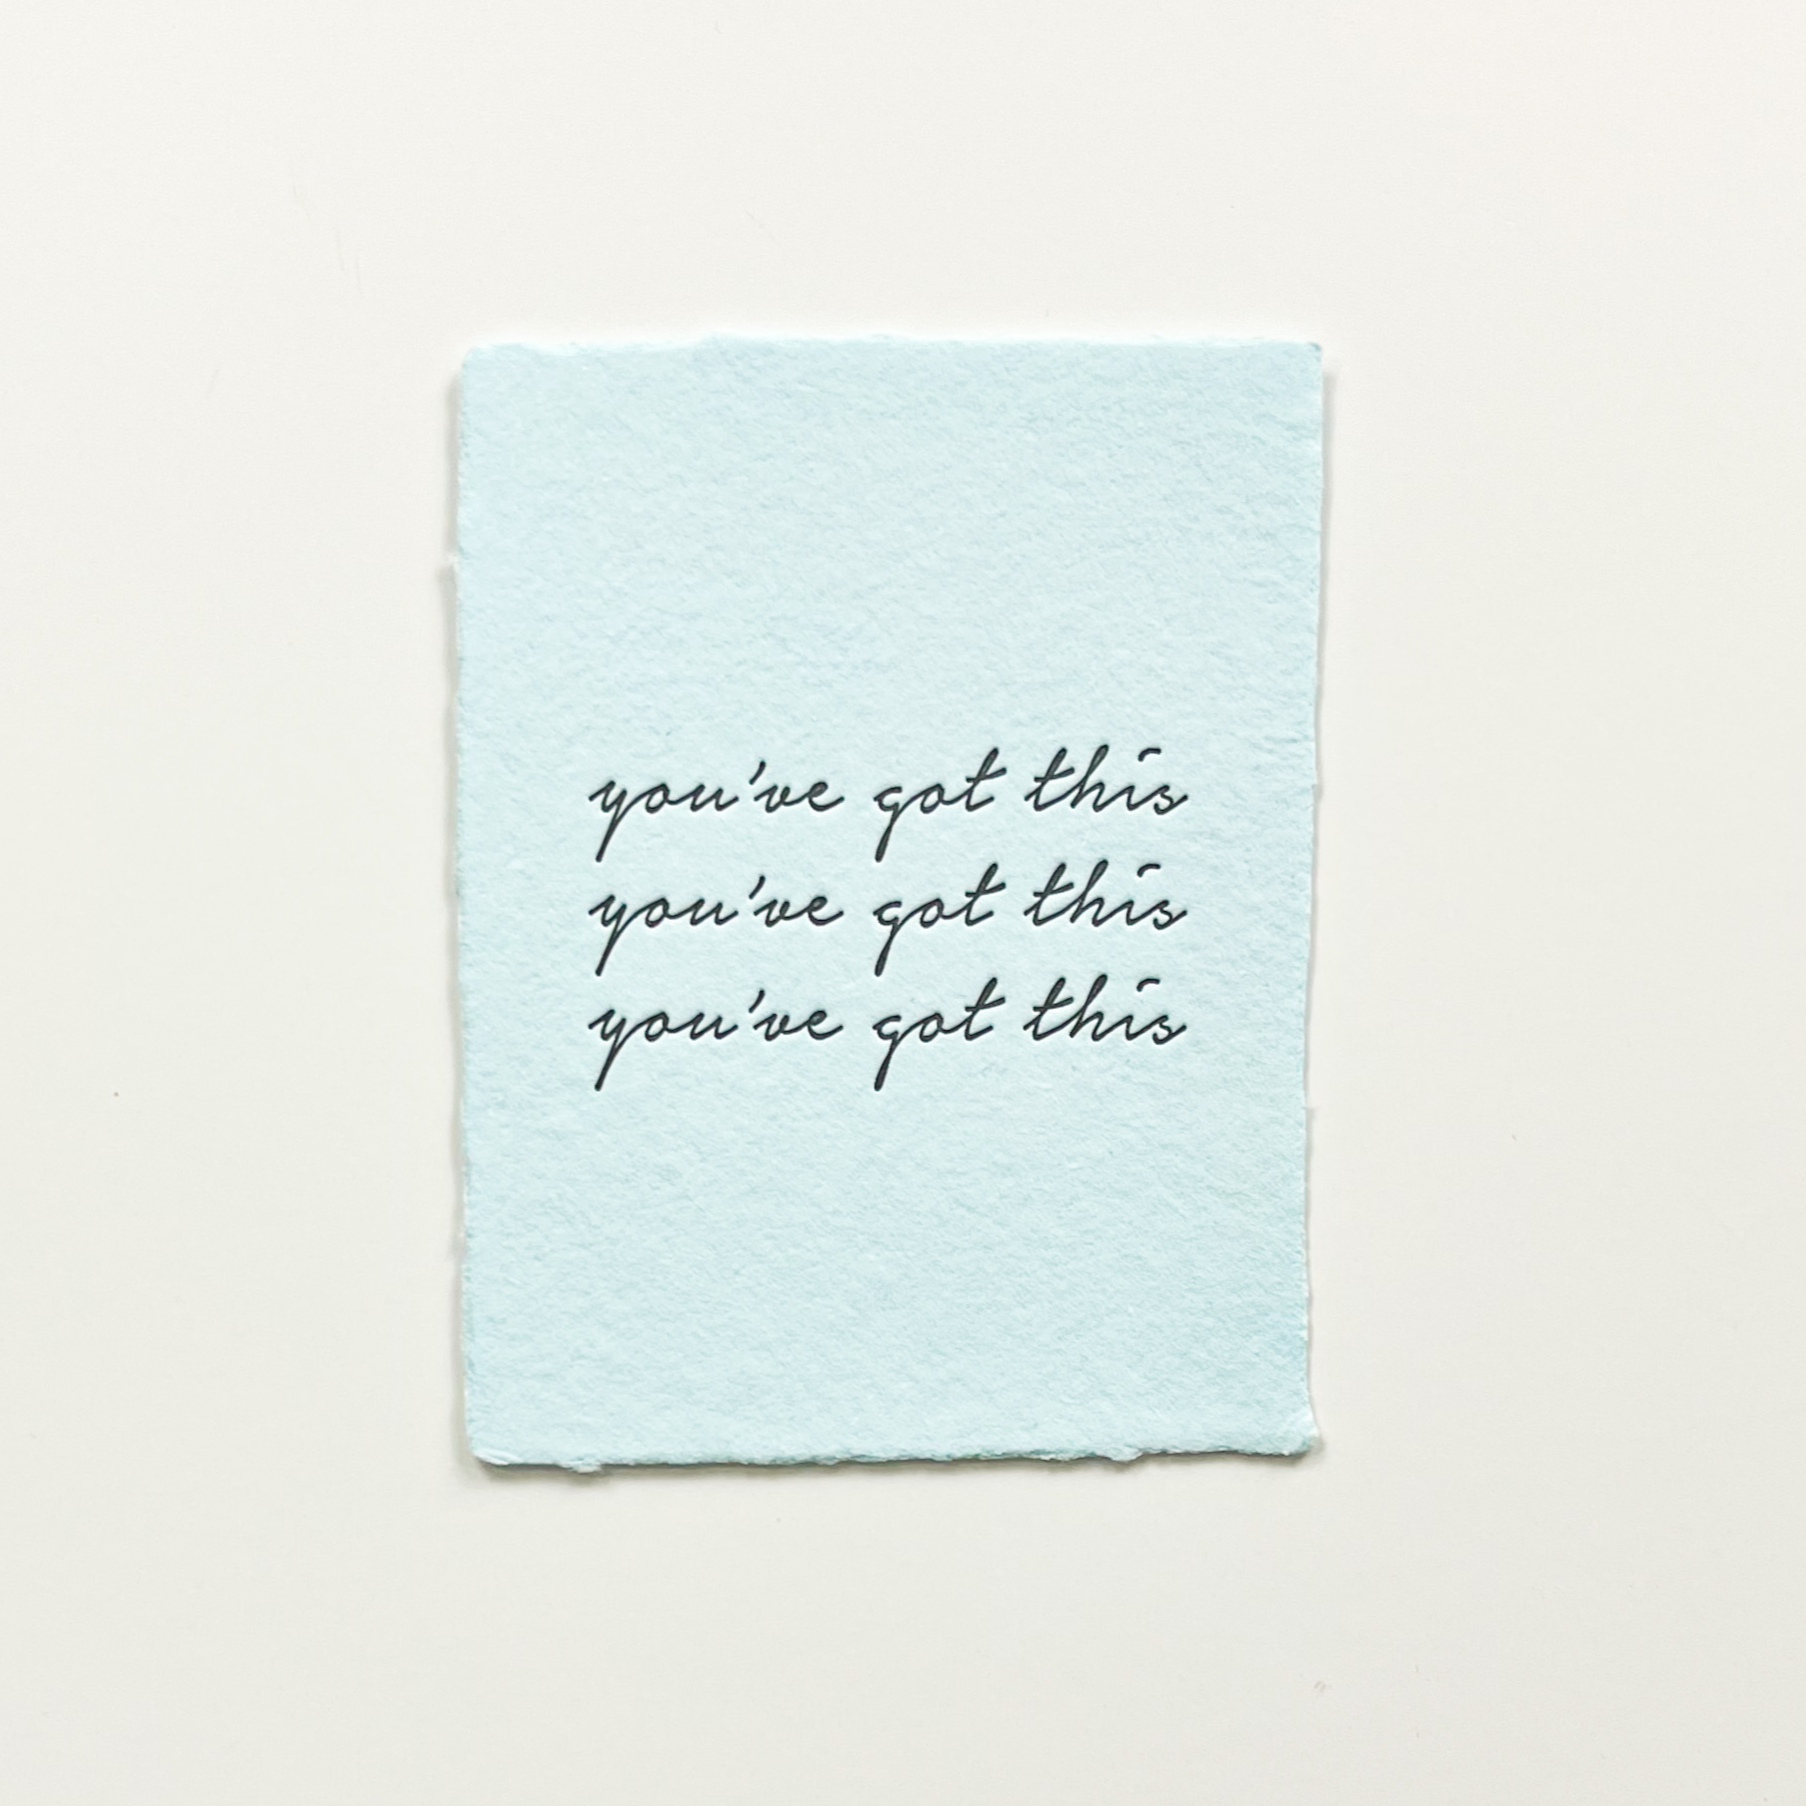 "You've got this" Greeting Card